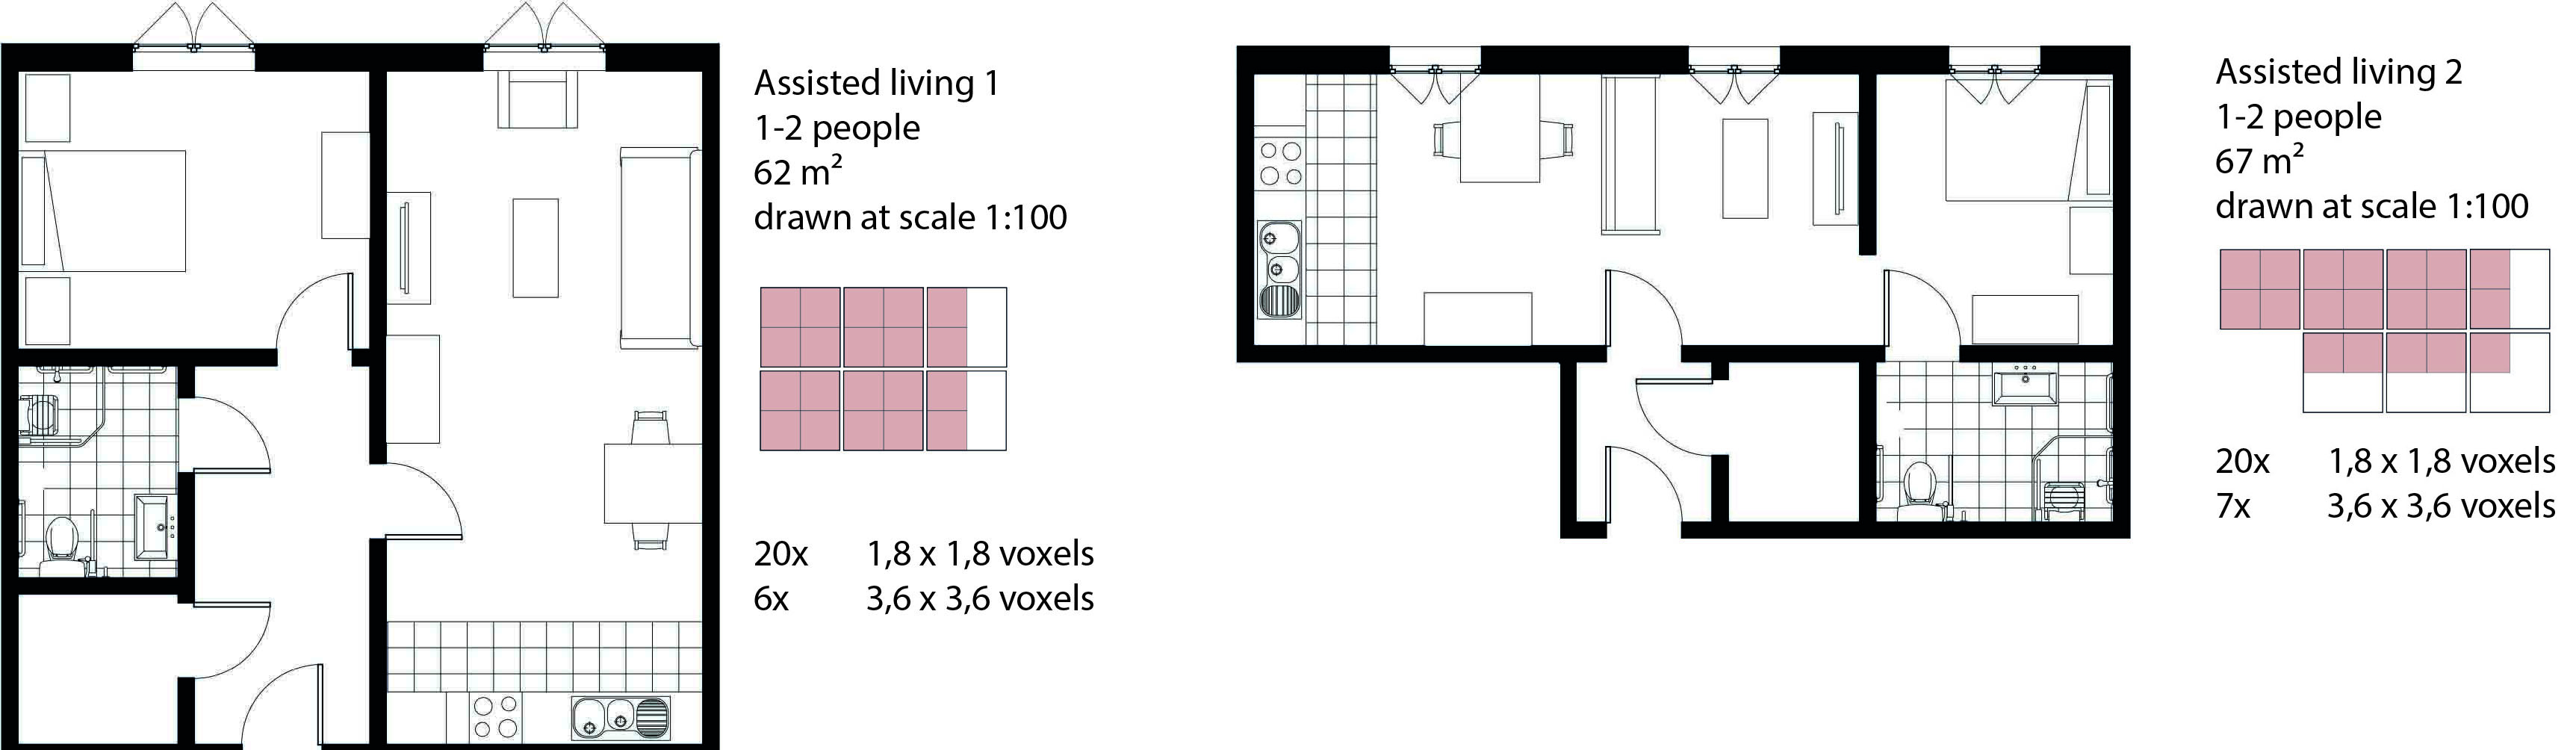 Floorplan - Assisted living I and Assisted living II